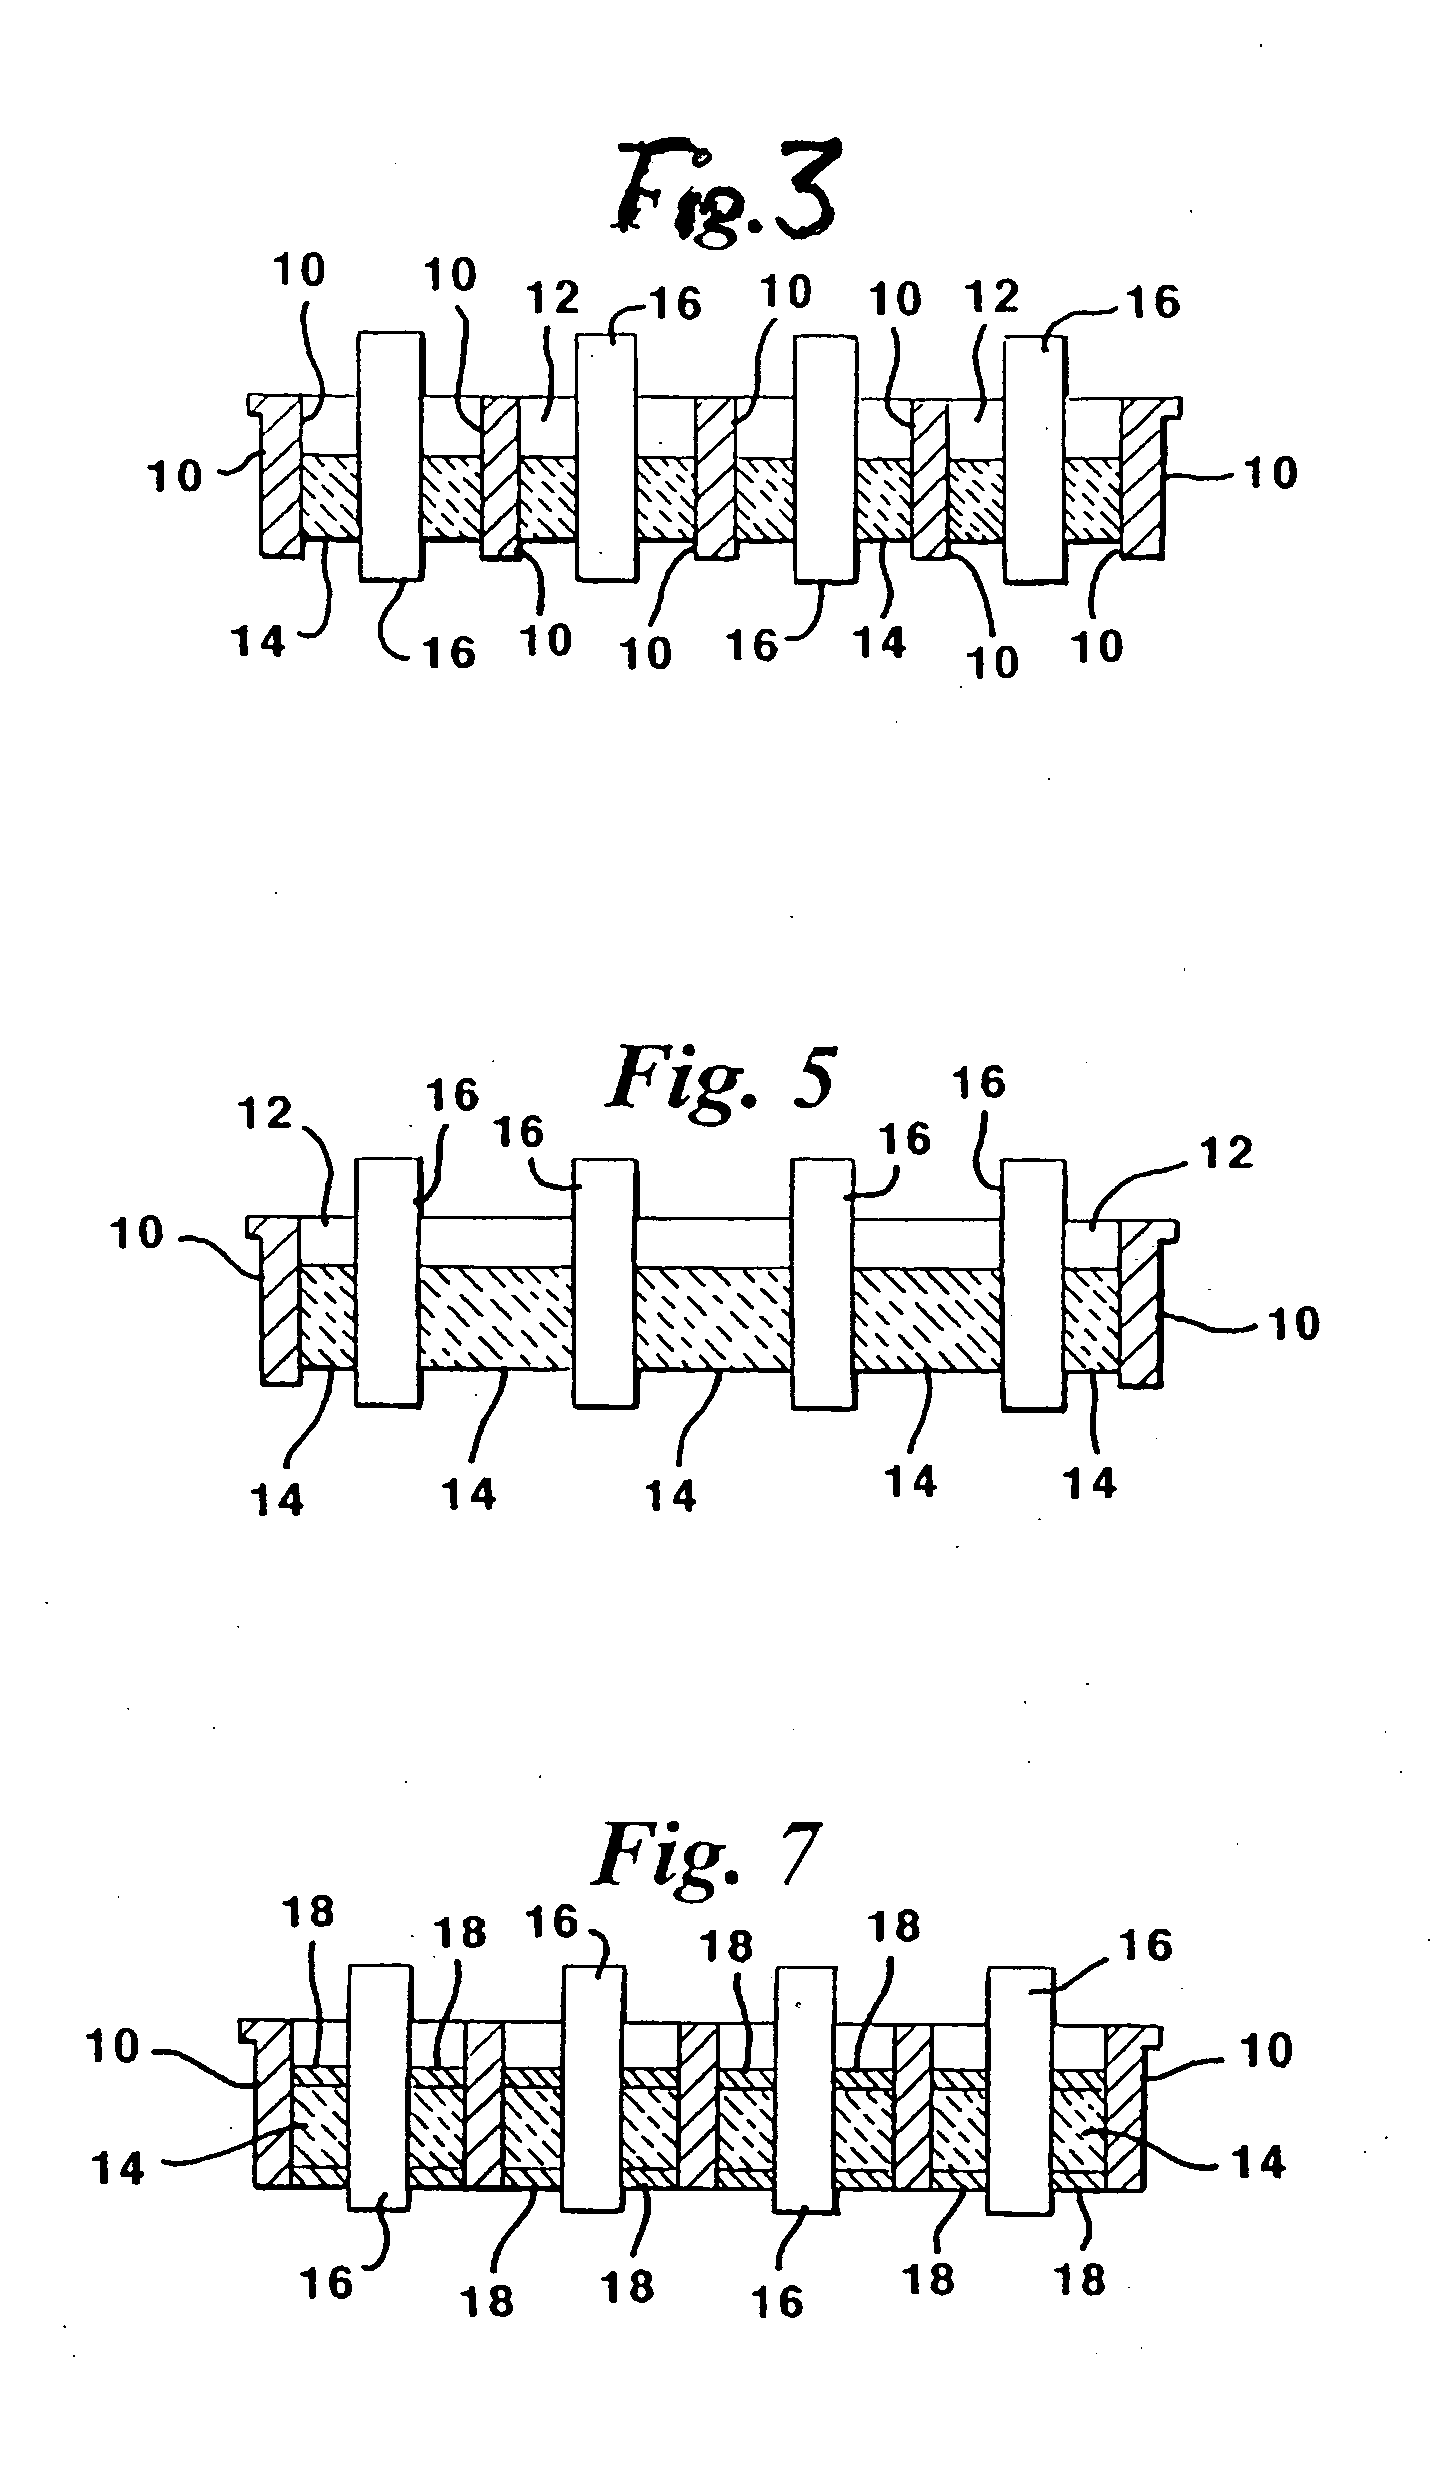 Glass-to-metal feedthrough seals having improved durability particularly under AC or DC bias